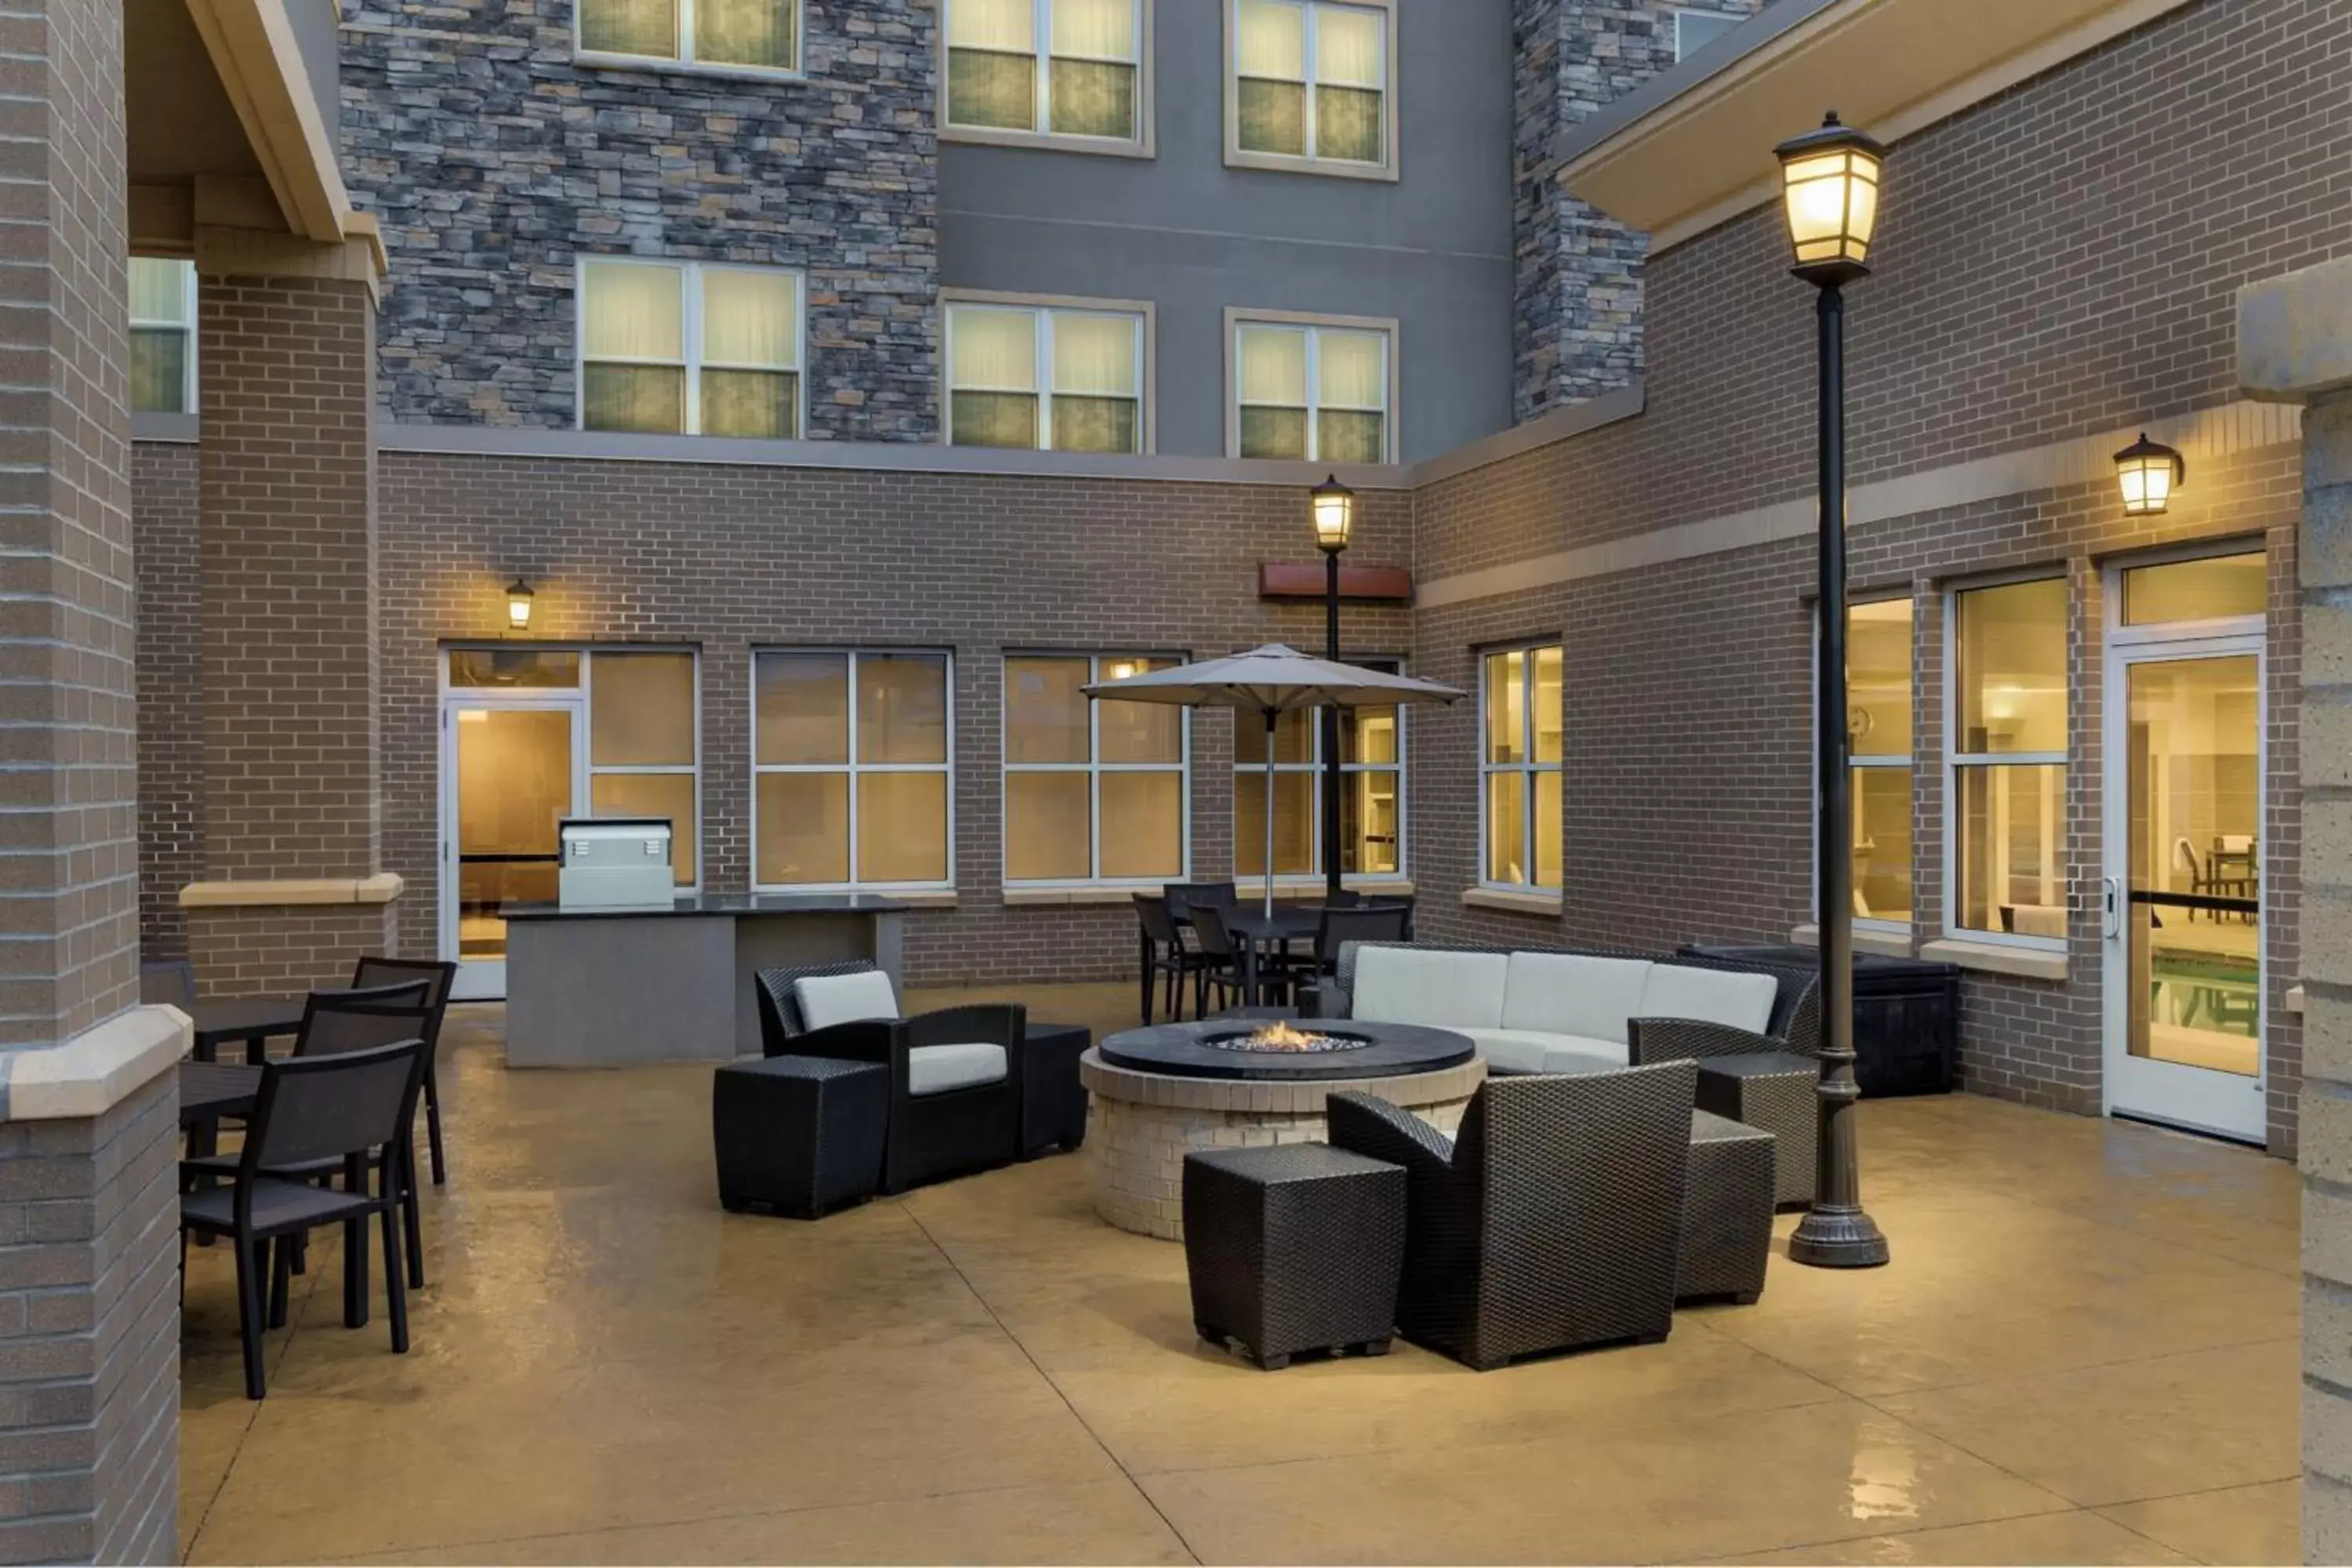 Property building in Residence Inn by Marriott Kansas City at The Legends